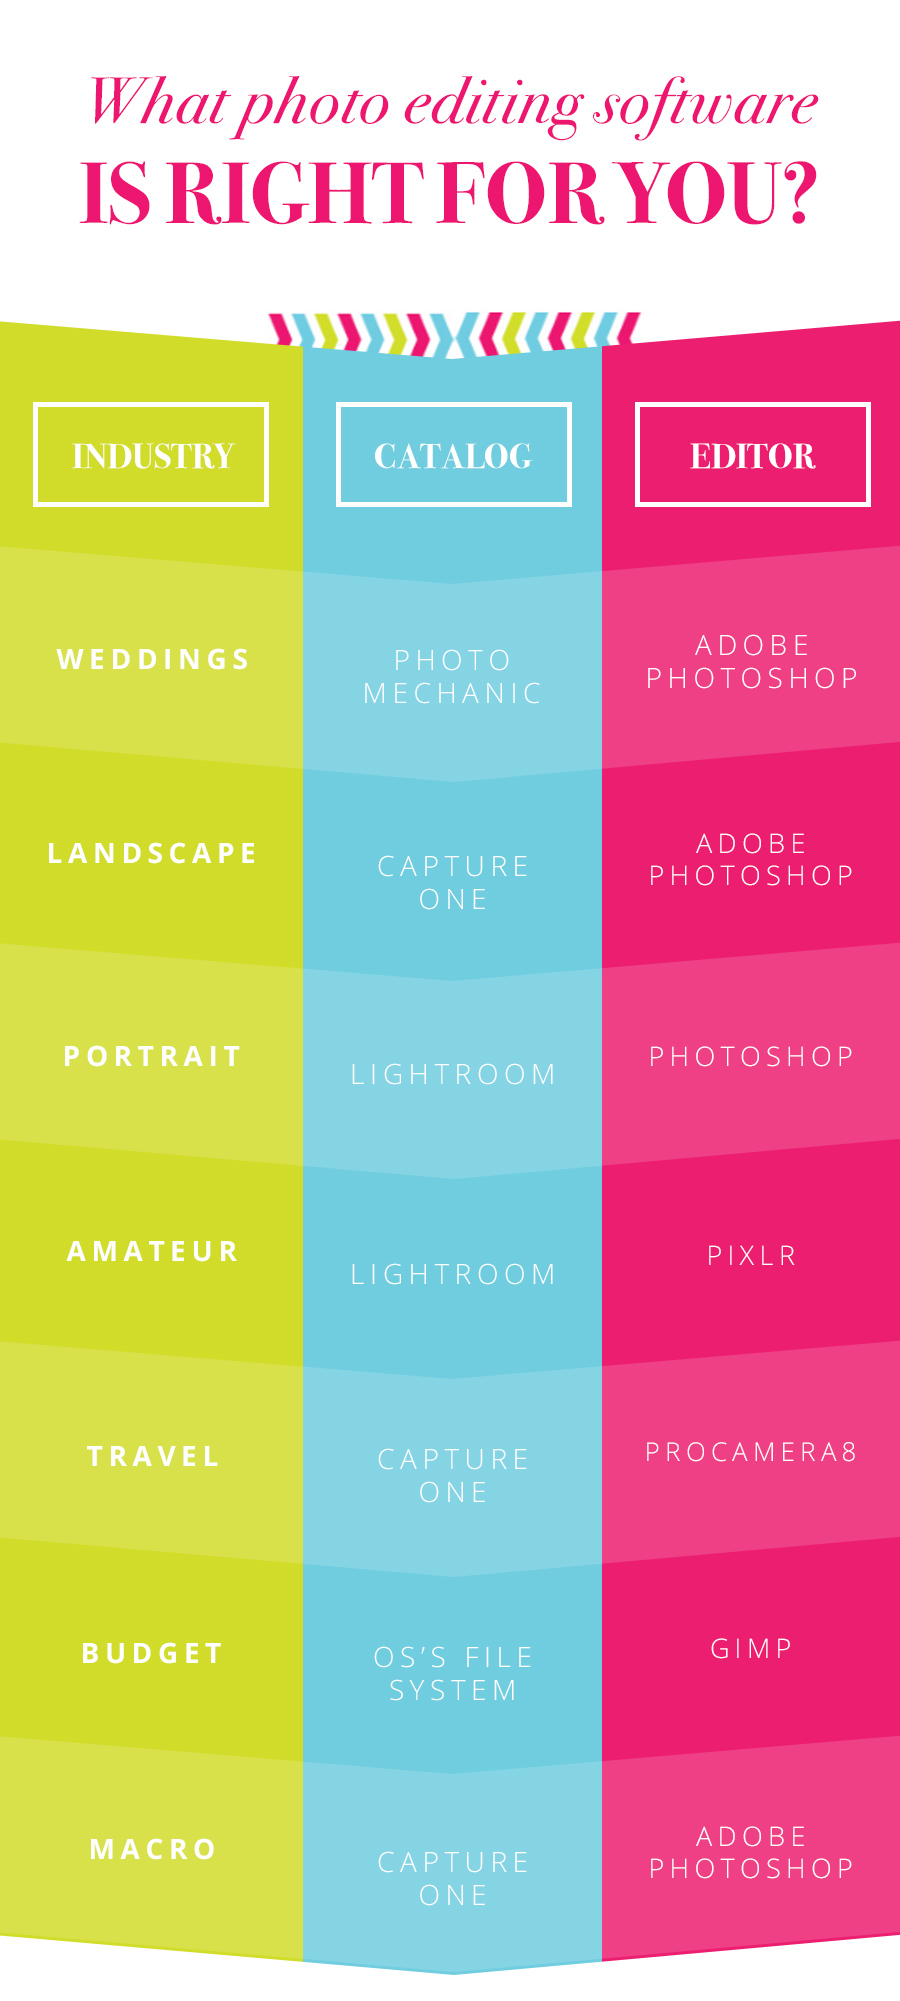 BlankMediaPrinting.com-What-photo-editing-software-is-right-for-you-infographic